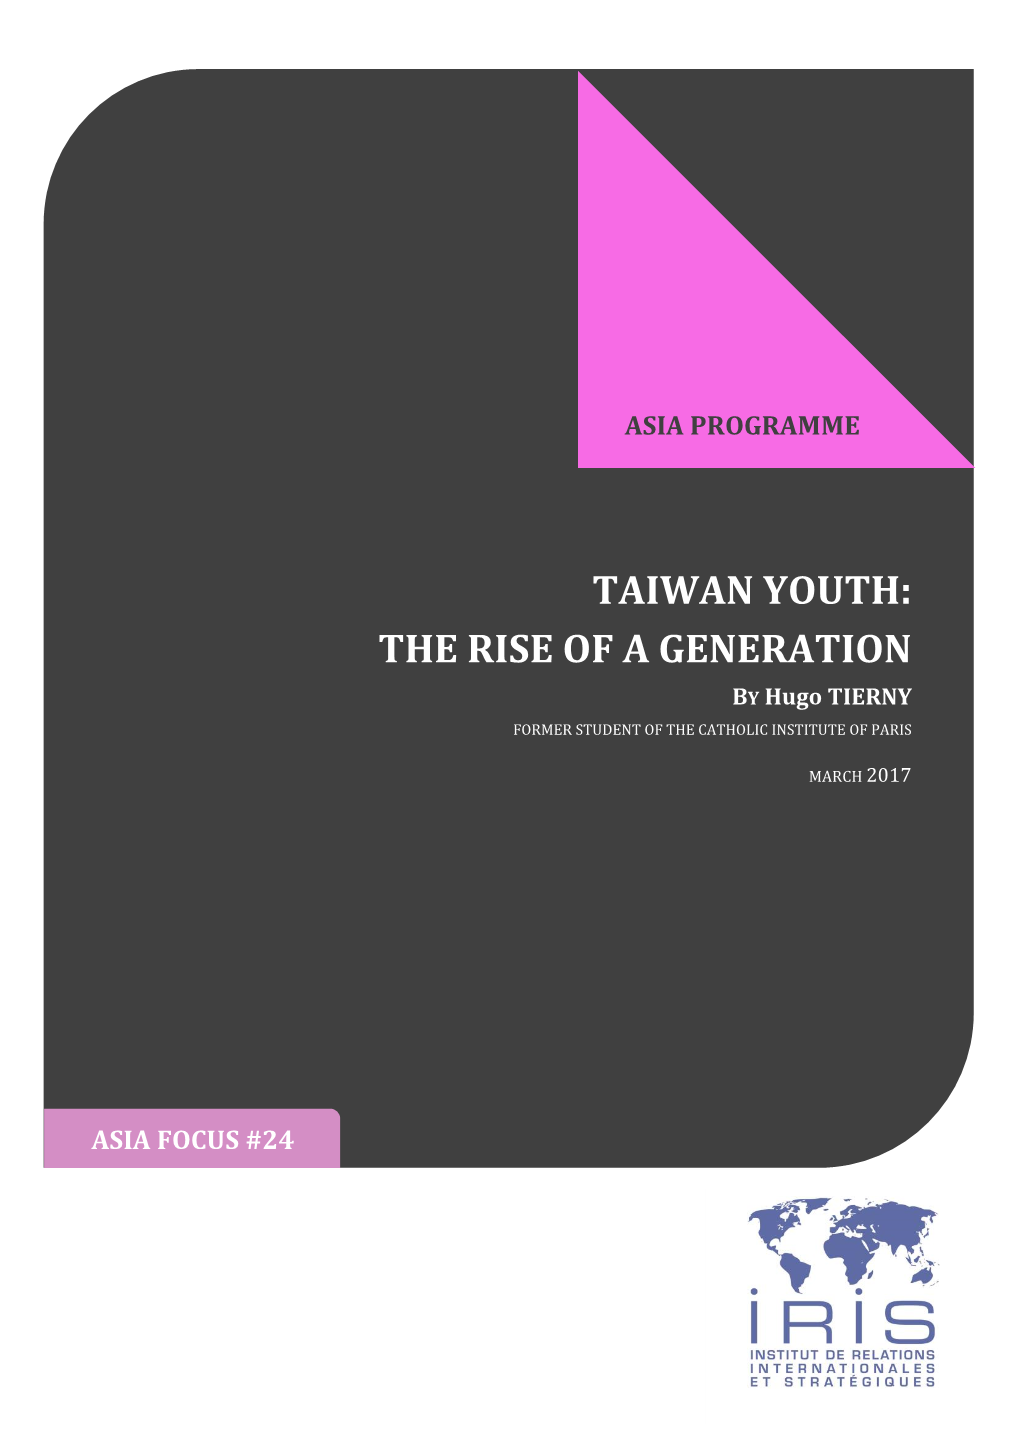 Taiwan Youth: the Rise of a Generation